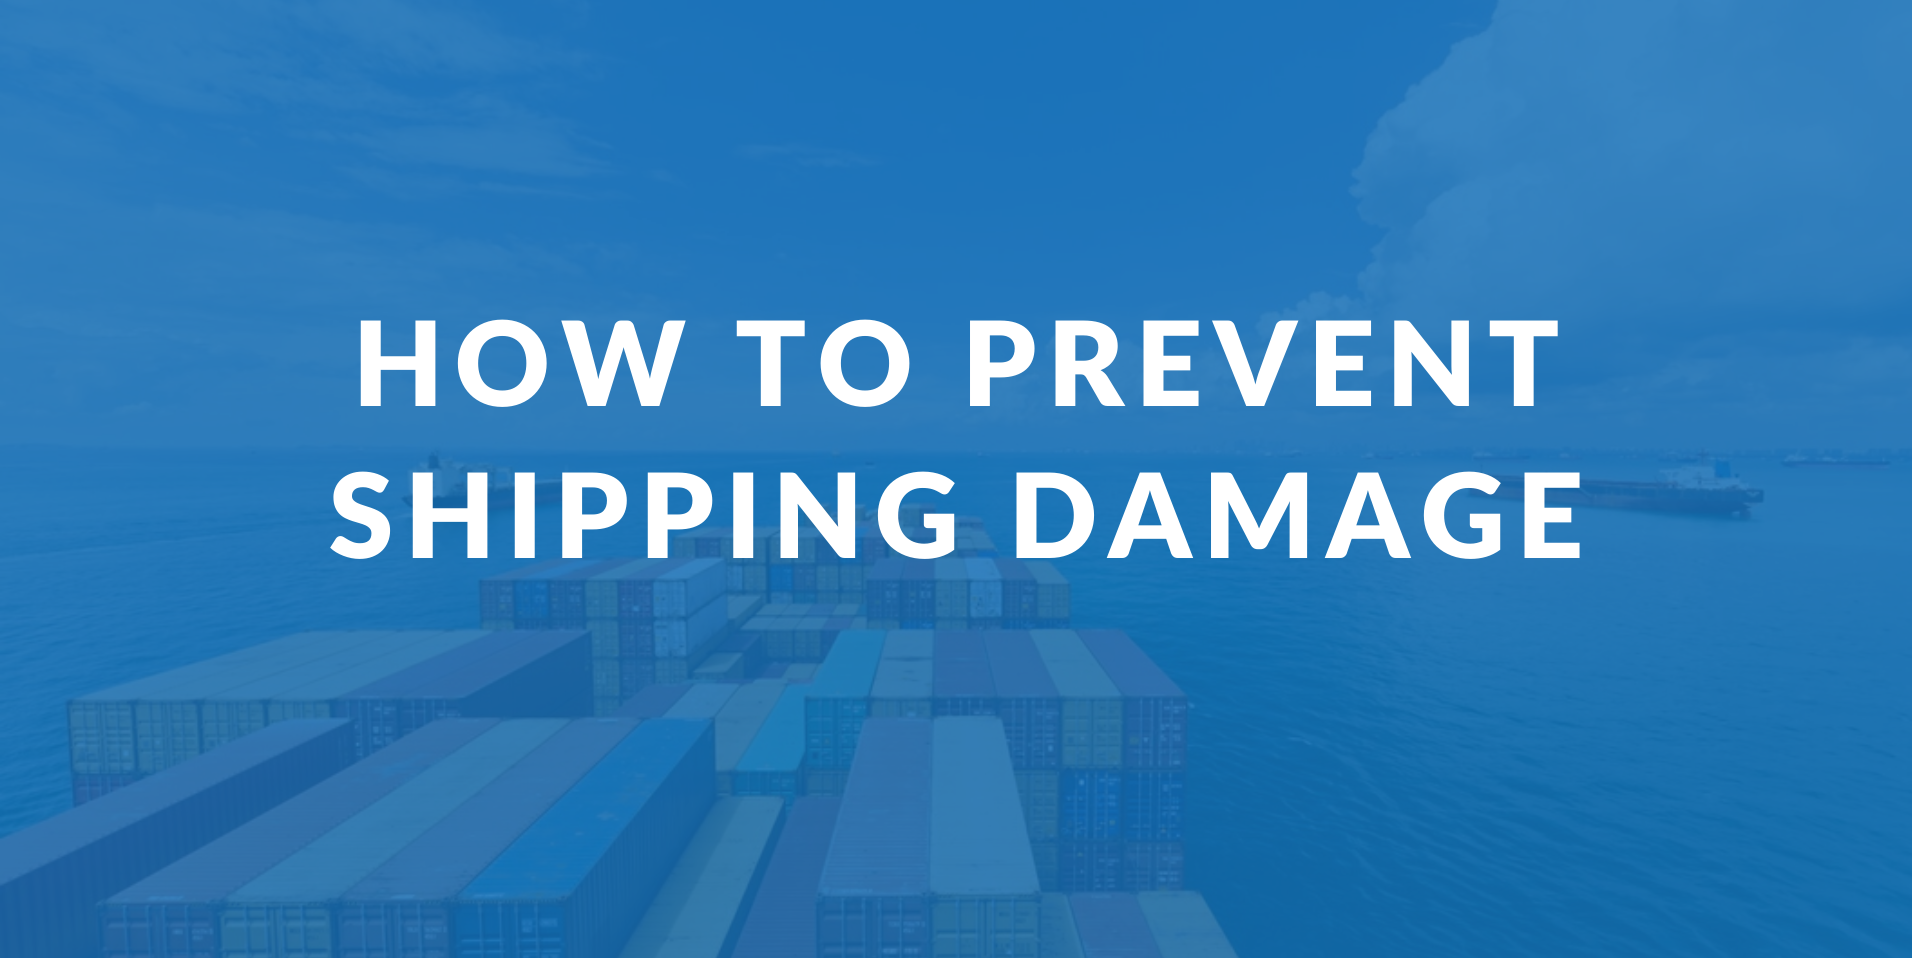 How to prevent shipping damage